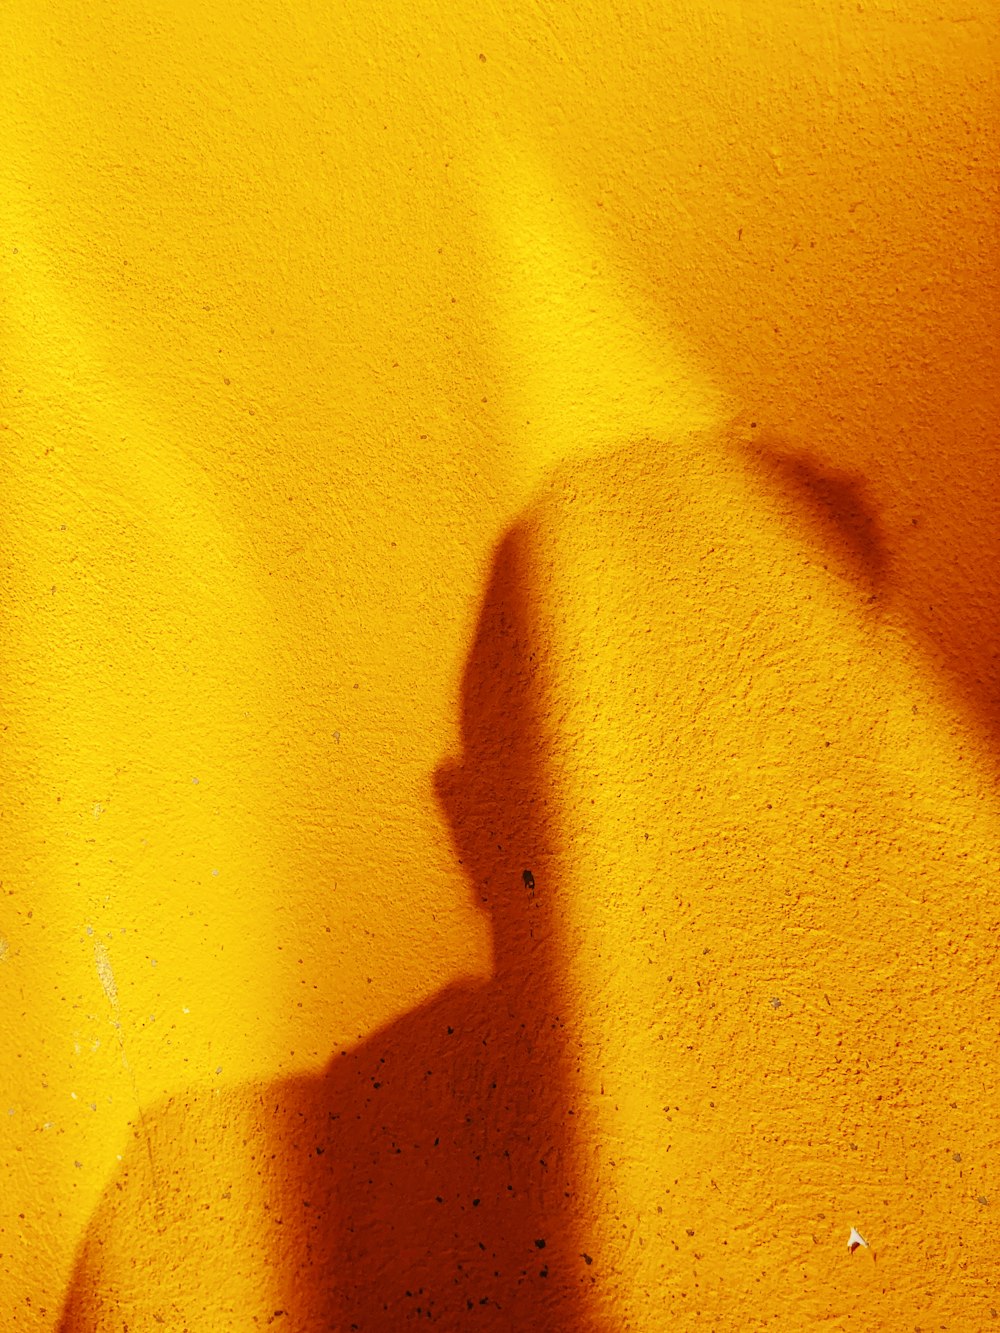 shadow of person on yellow wall